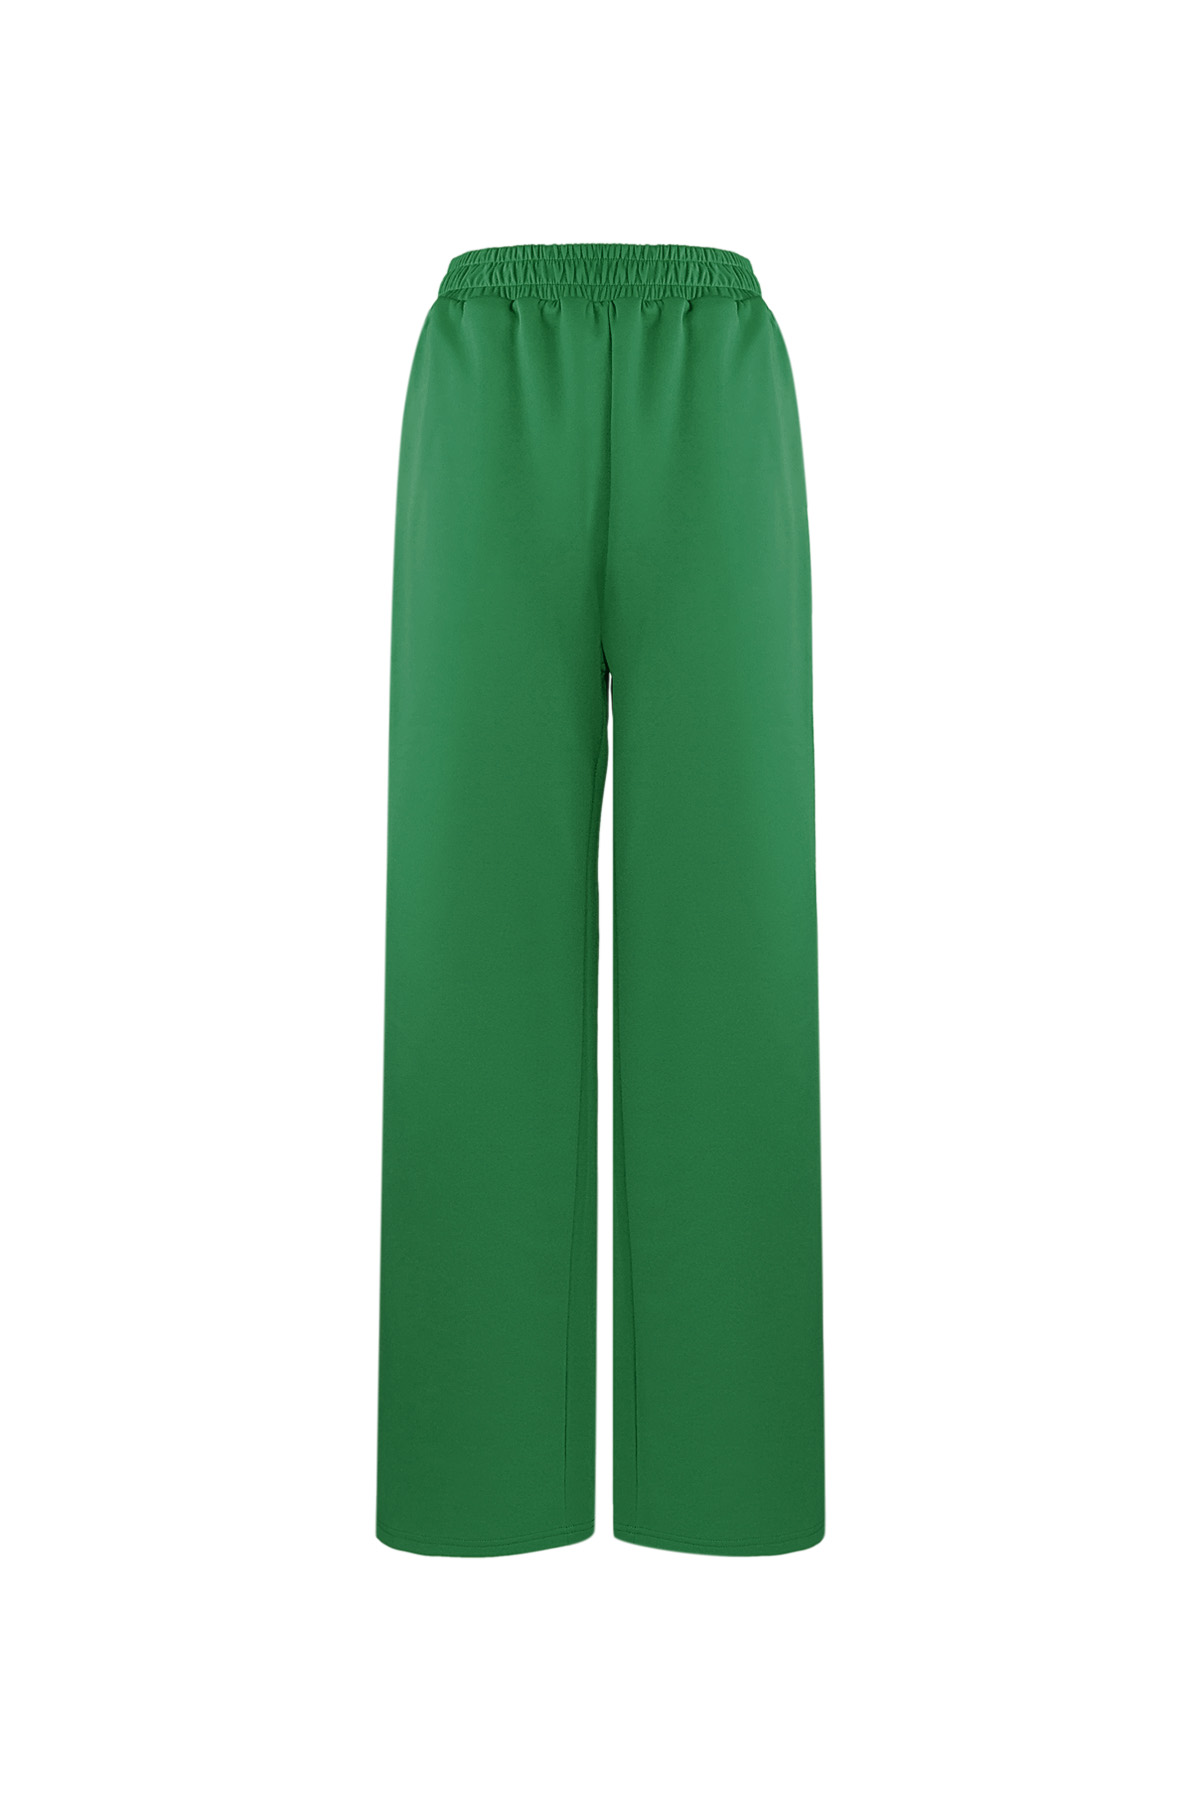 Striped must have pants - green S h5 